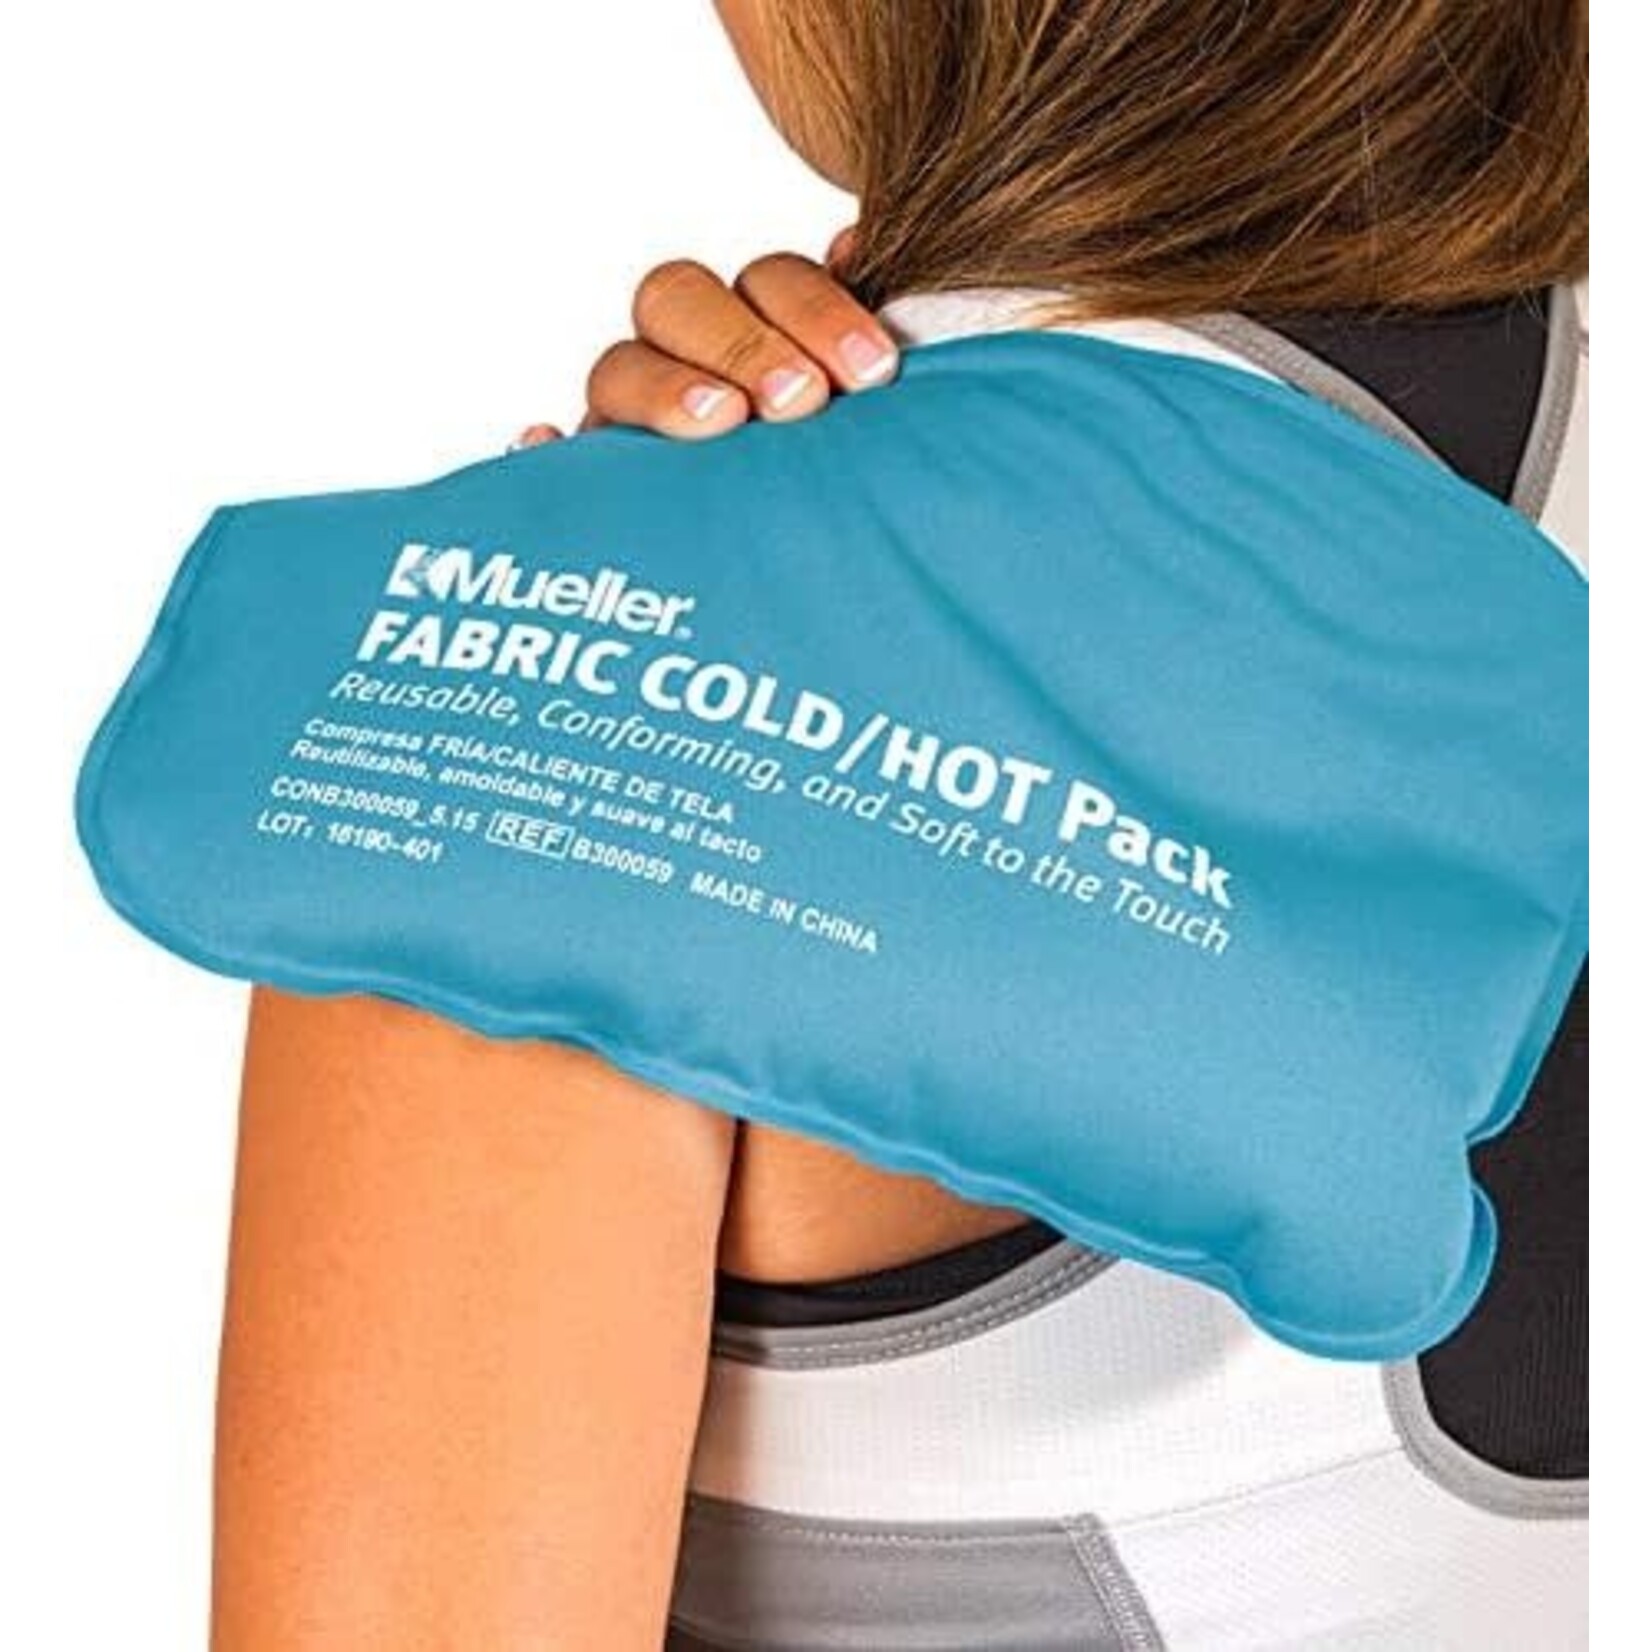 Mueller Sports Medicine RecoveryCare Fabric Reusable Cold/Hot Pack, for Men and Women, One Size